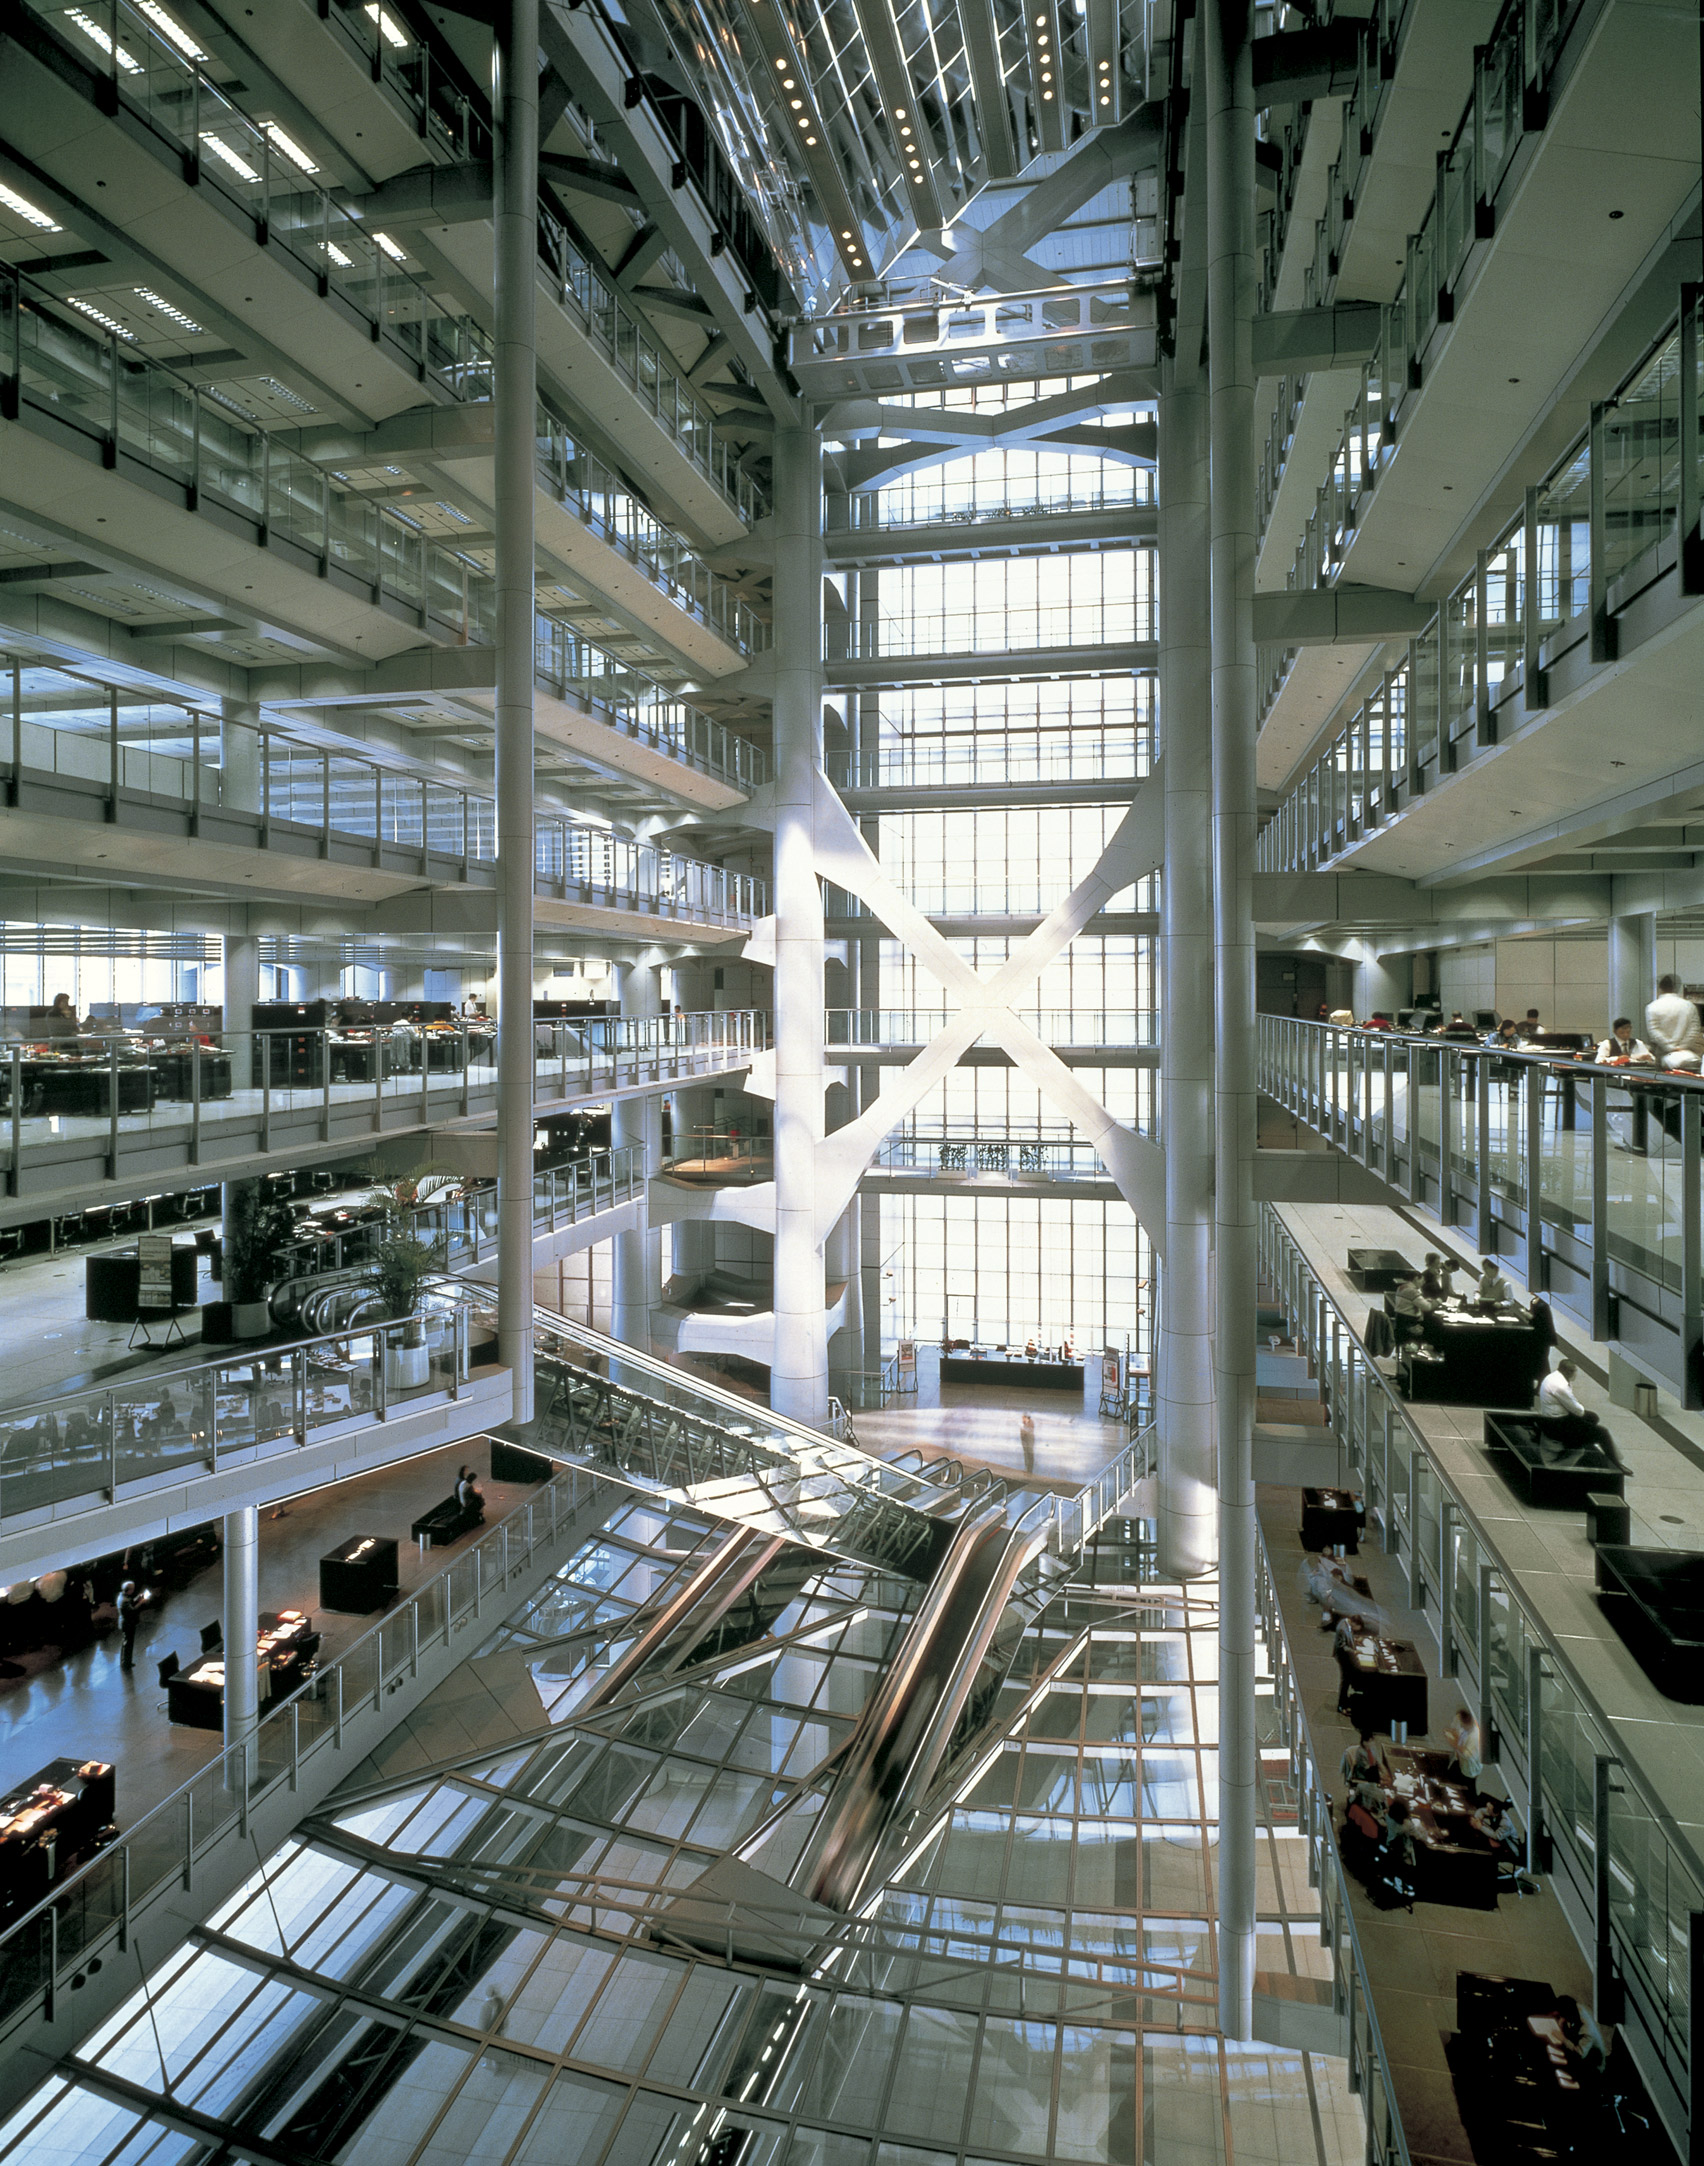 High-tech architect Norman Foster: HSBC Building in Hong Kong by Norman Foster